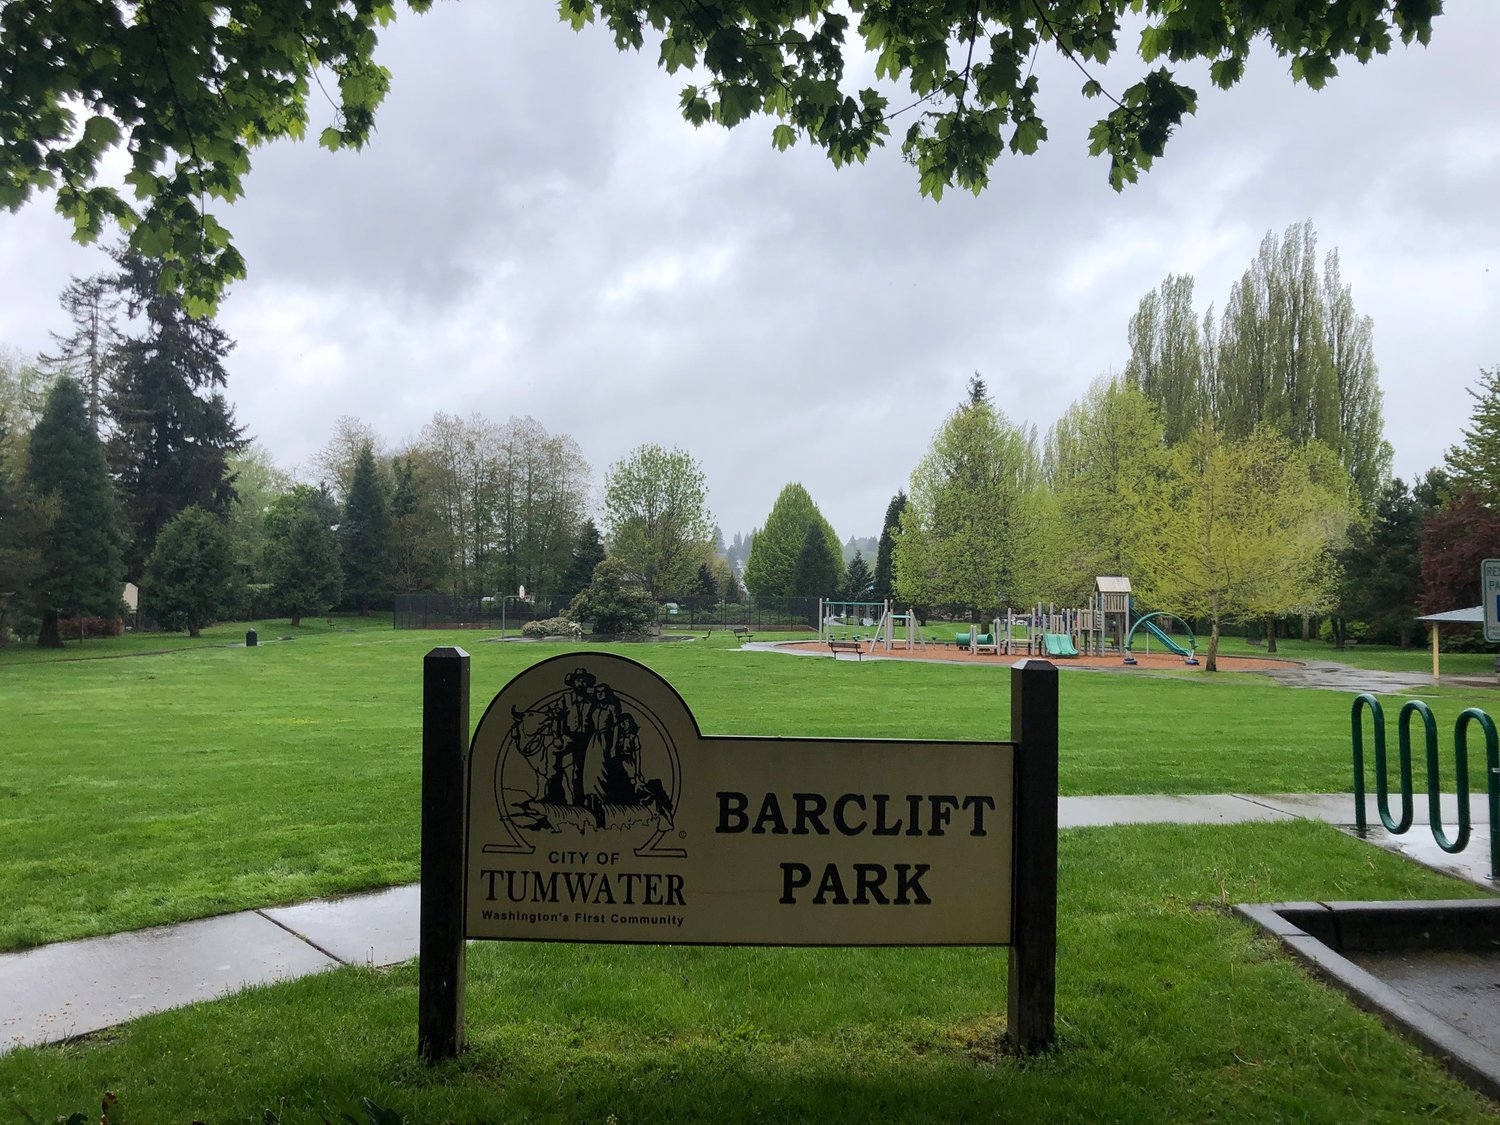 Tumwater's Barclift Park will receive a prefabricated restroom under the plans approved by the city council on May 3, 2022.